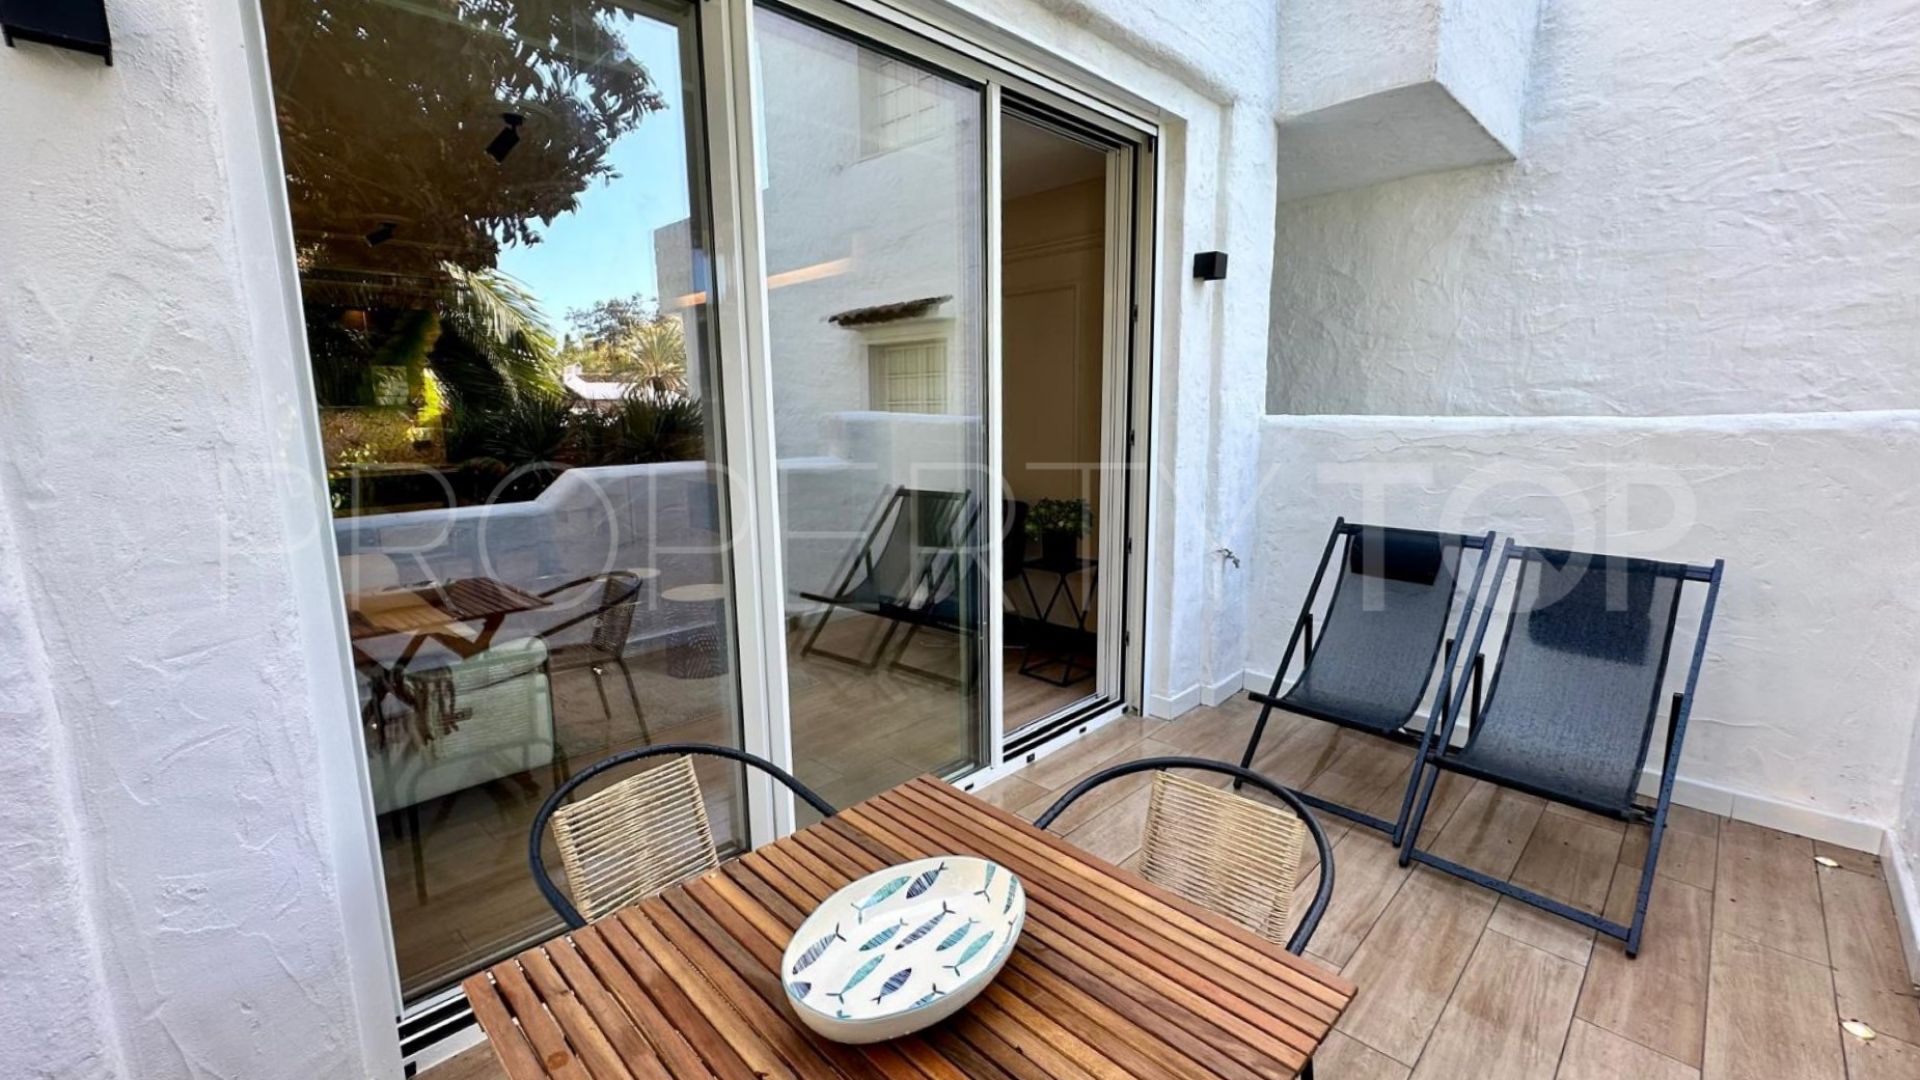 For sale ground floor apartment in Marina Puente Romano with 1 bedroom